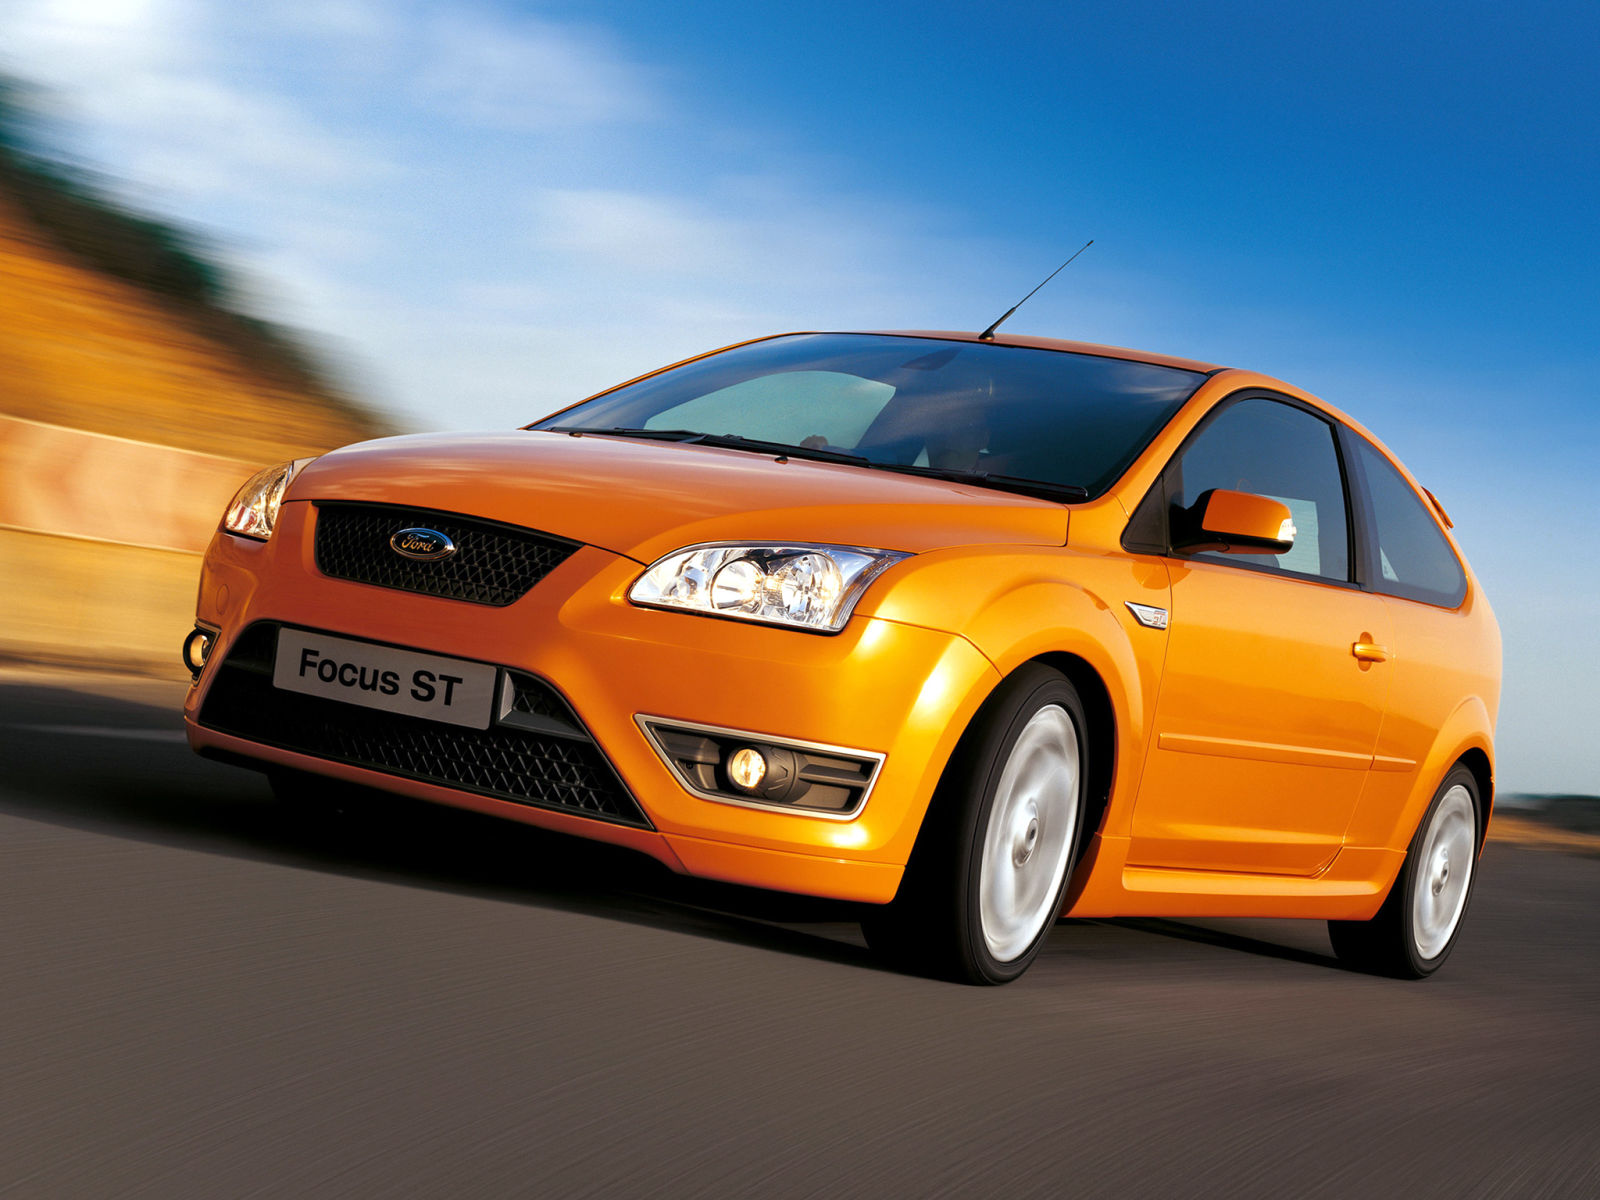 Was called the Ford Focus XR5 Turbo in Australasia, where they continued the old XR naming schemes for fast Fords.